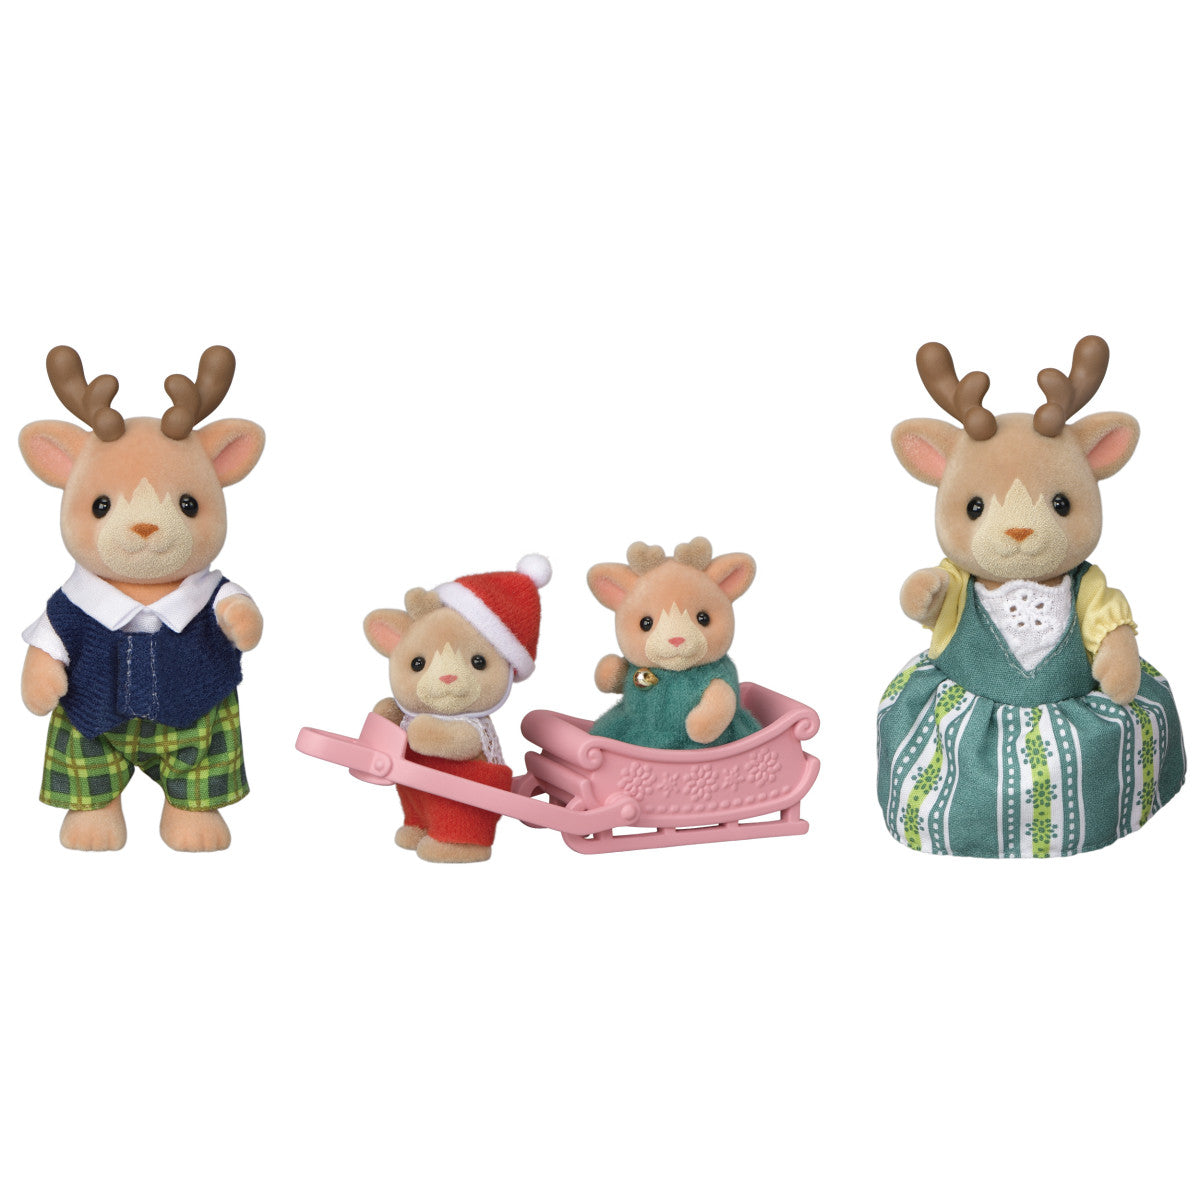 Reindeer Family by Calico Critters #CC2058